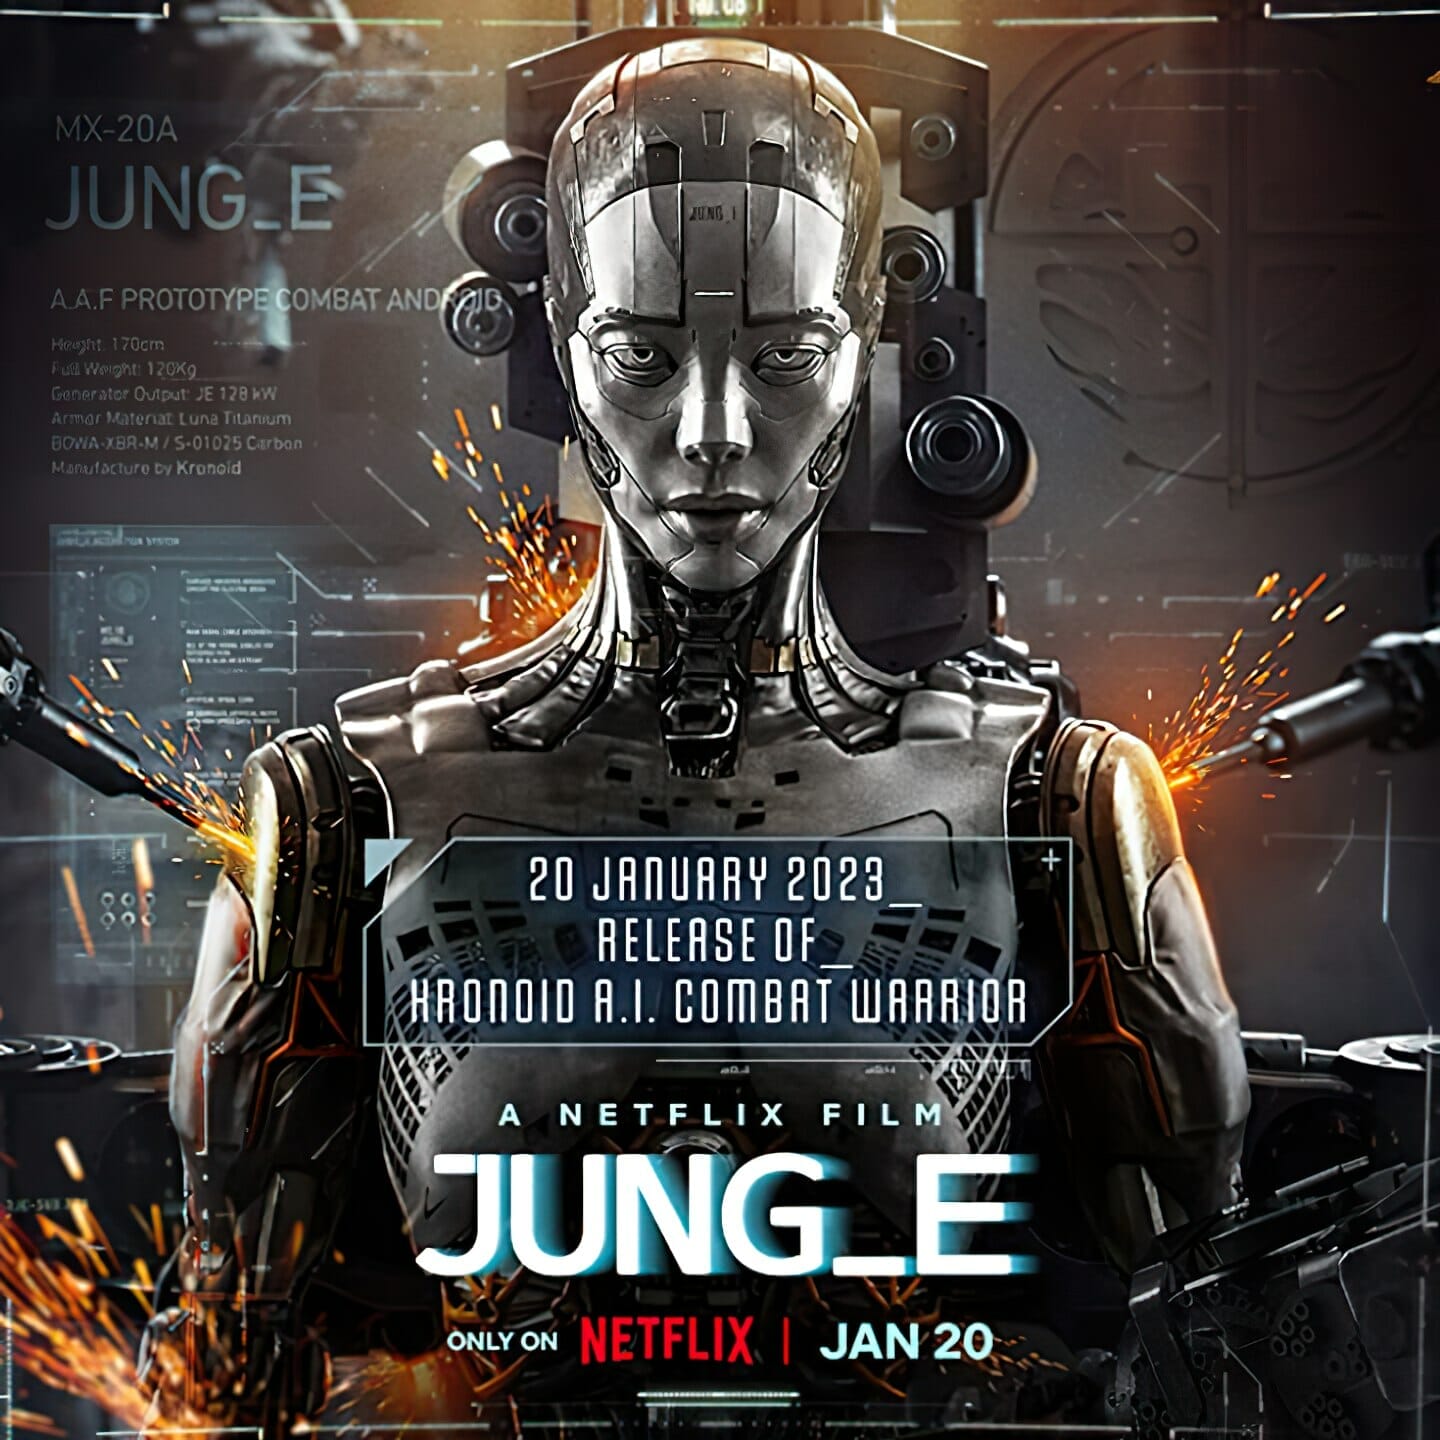 JUNG_E poster with launch date and android torso